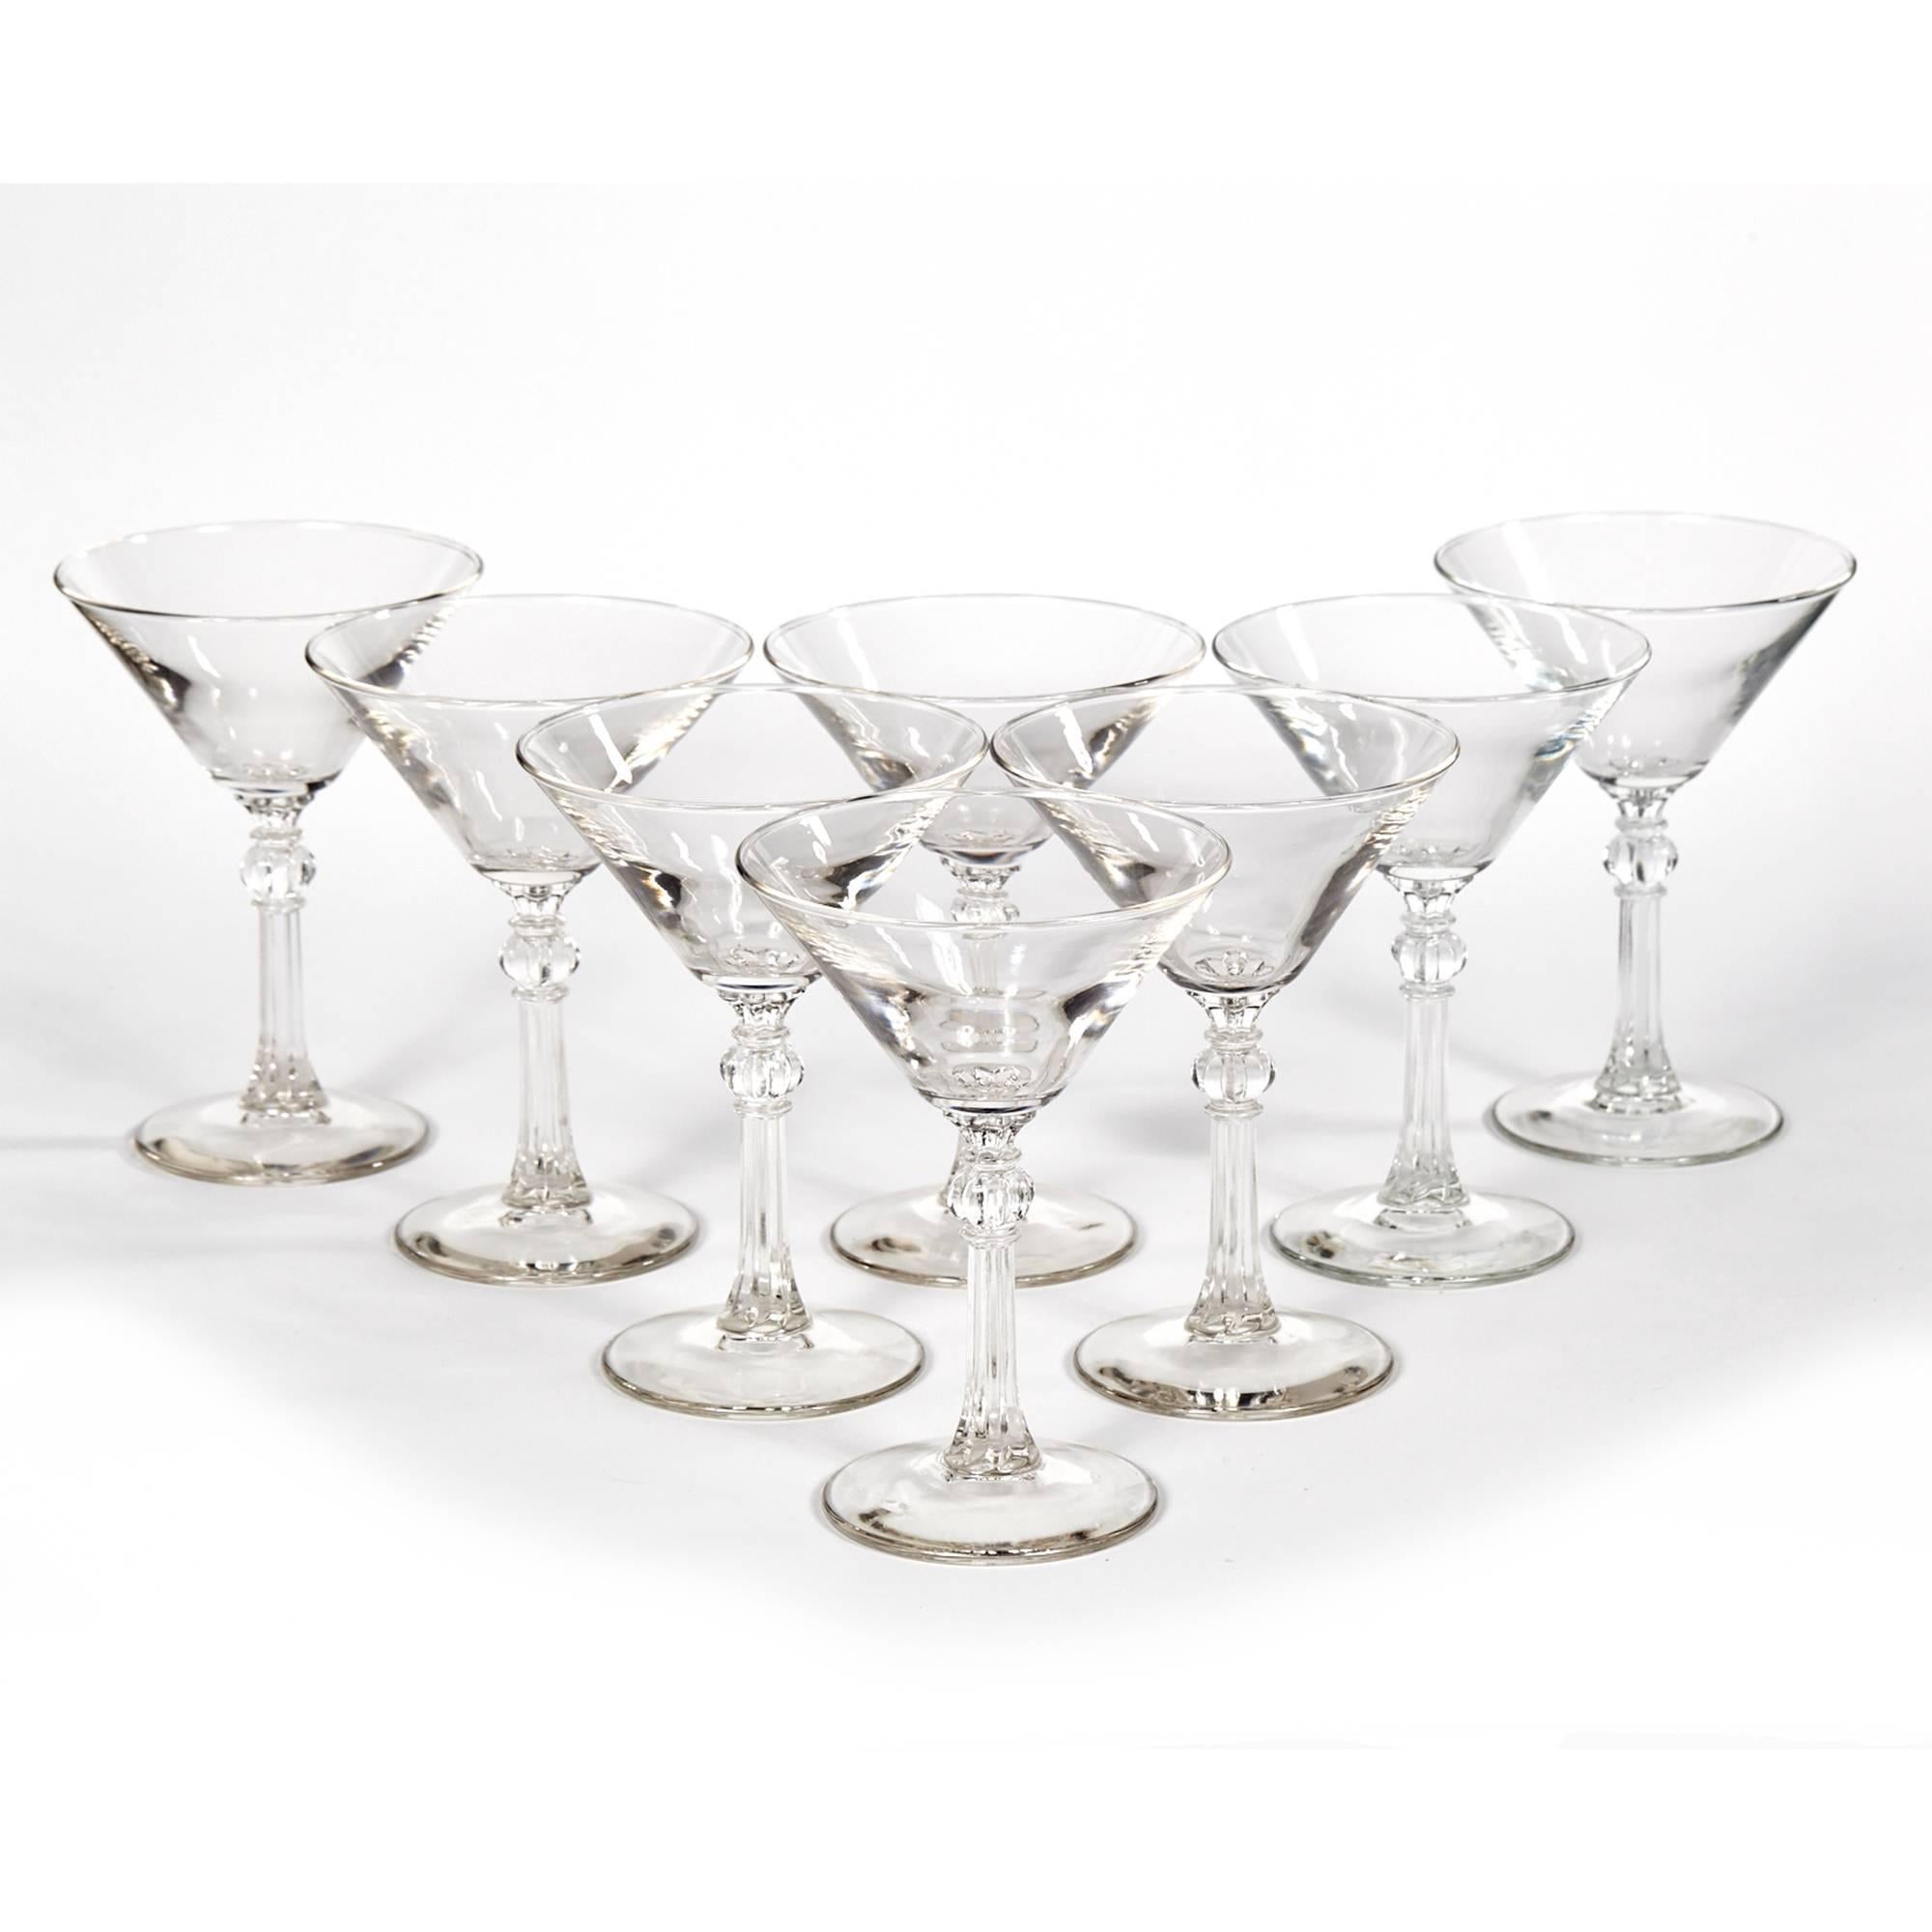 Vintage clear glass martini stems set of eight, circa 1950s.
 